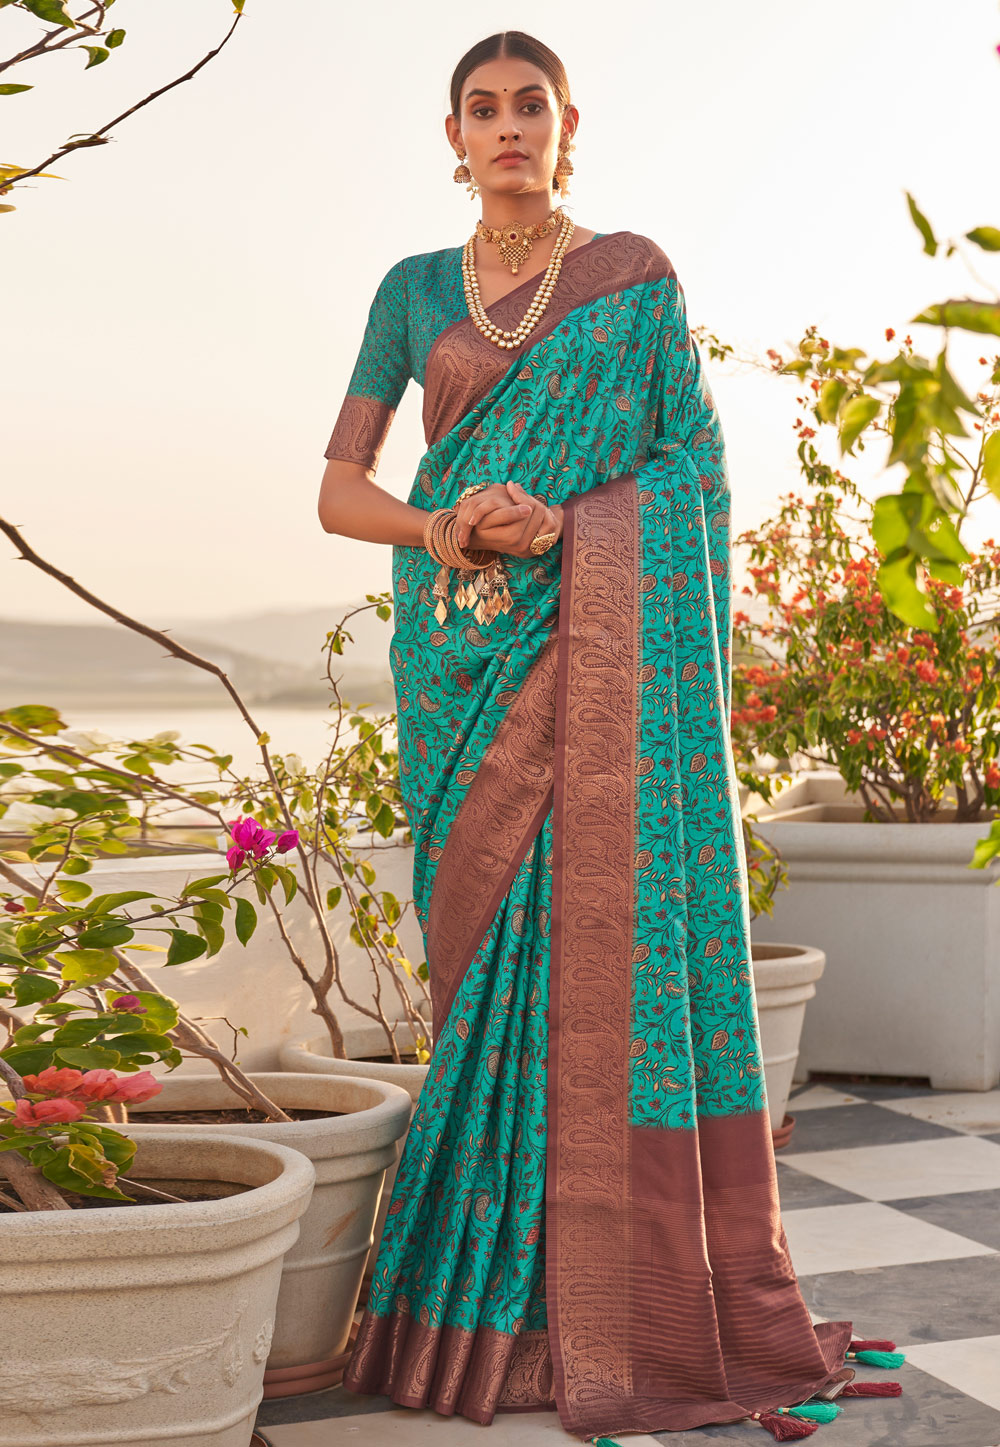 Modern Wear Silk turquoise Bollywood Indian Sari With Blouse Piece